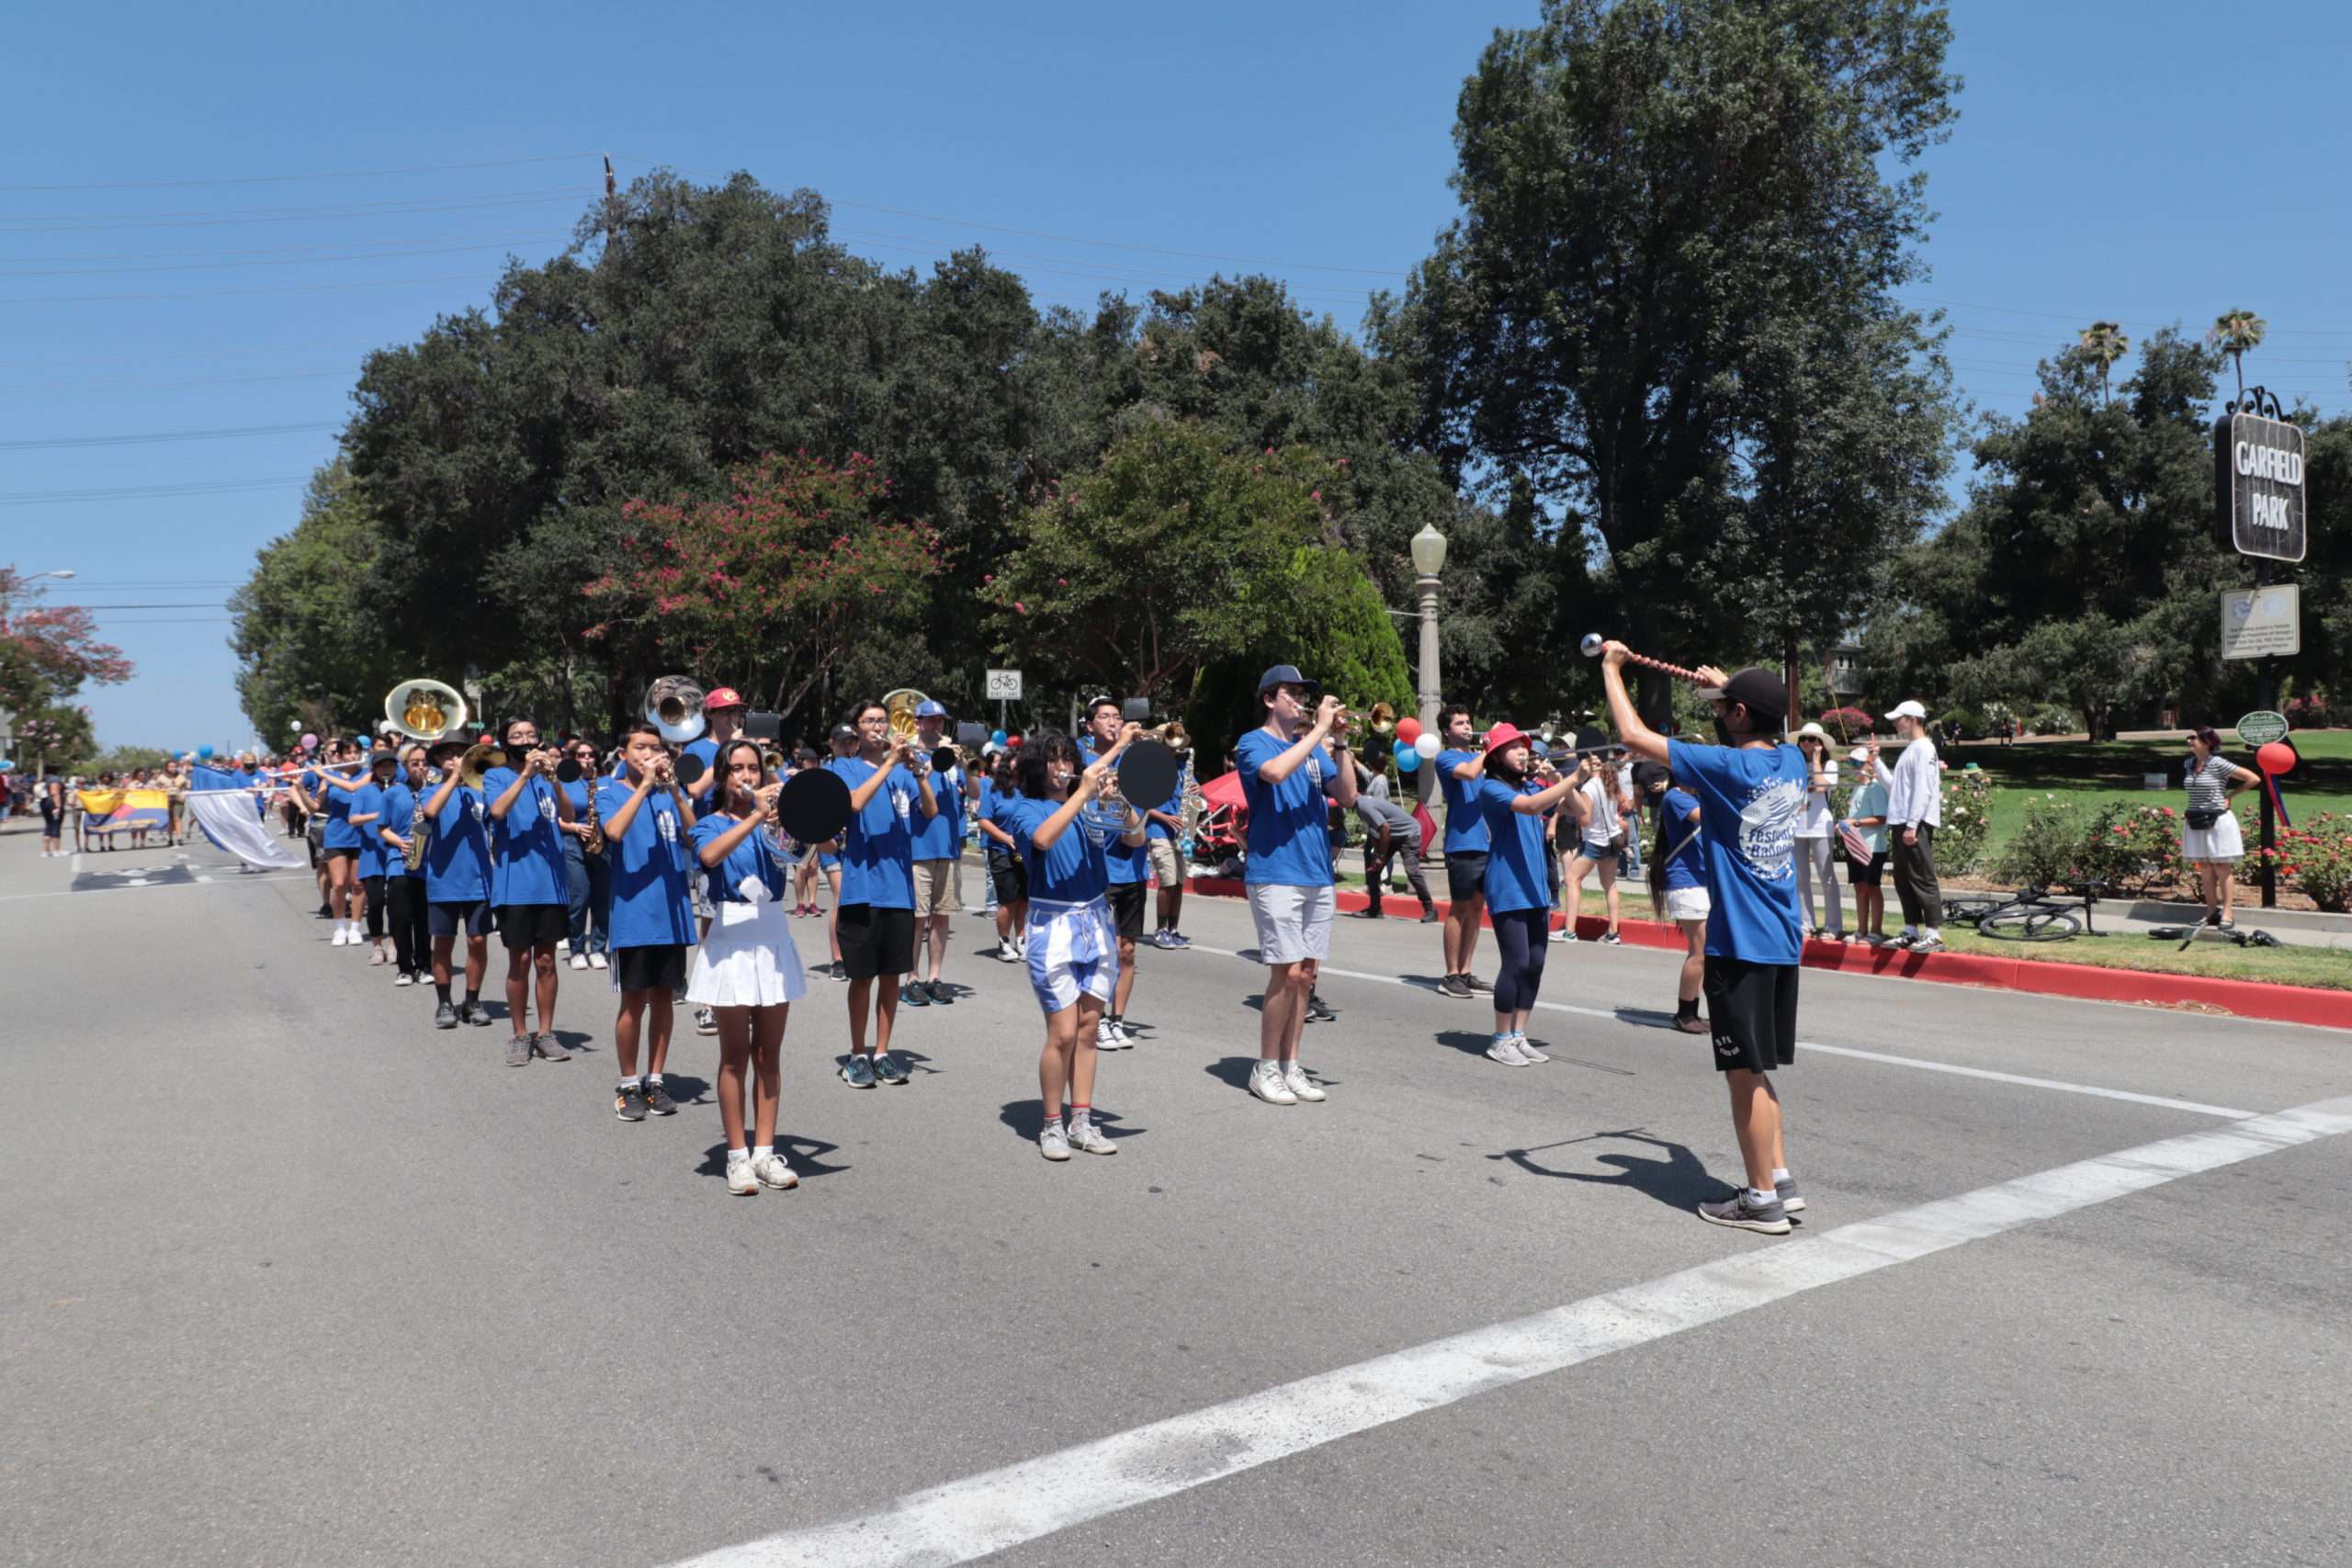 Minuteman Band marches at Festival of Balloons